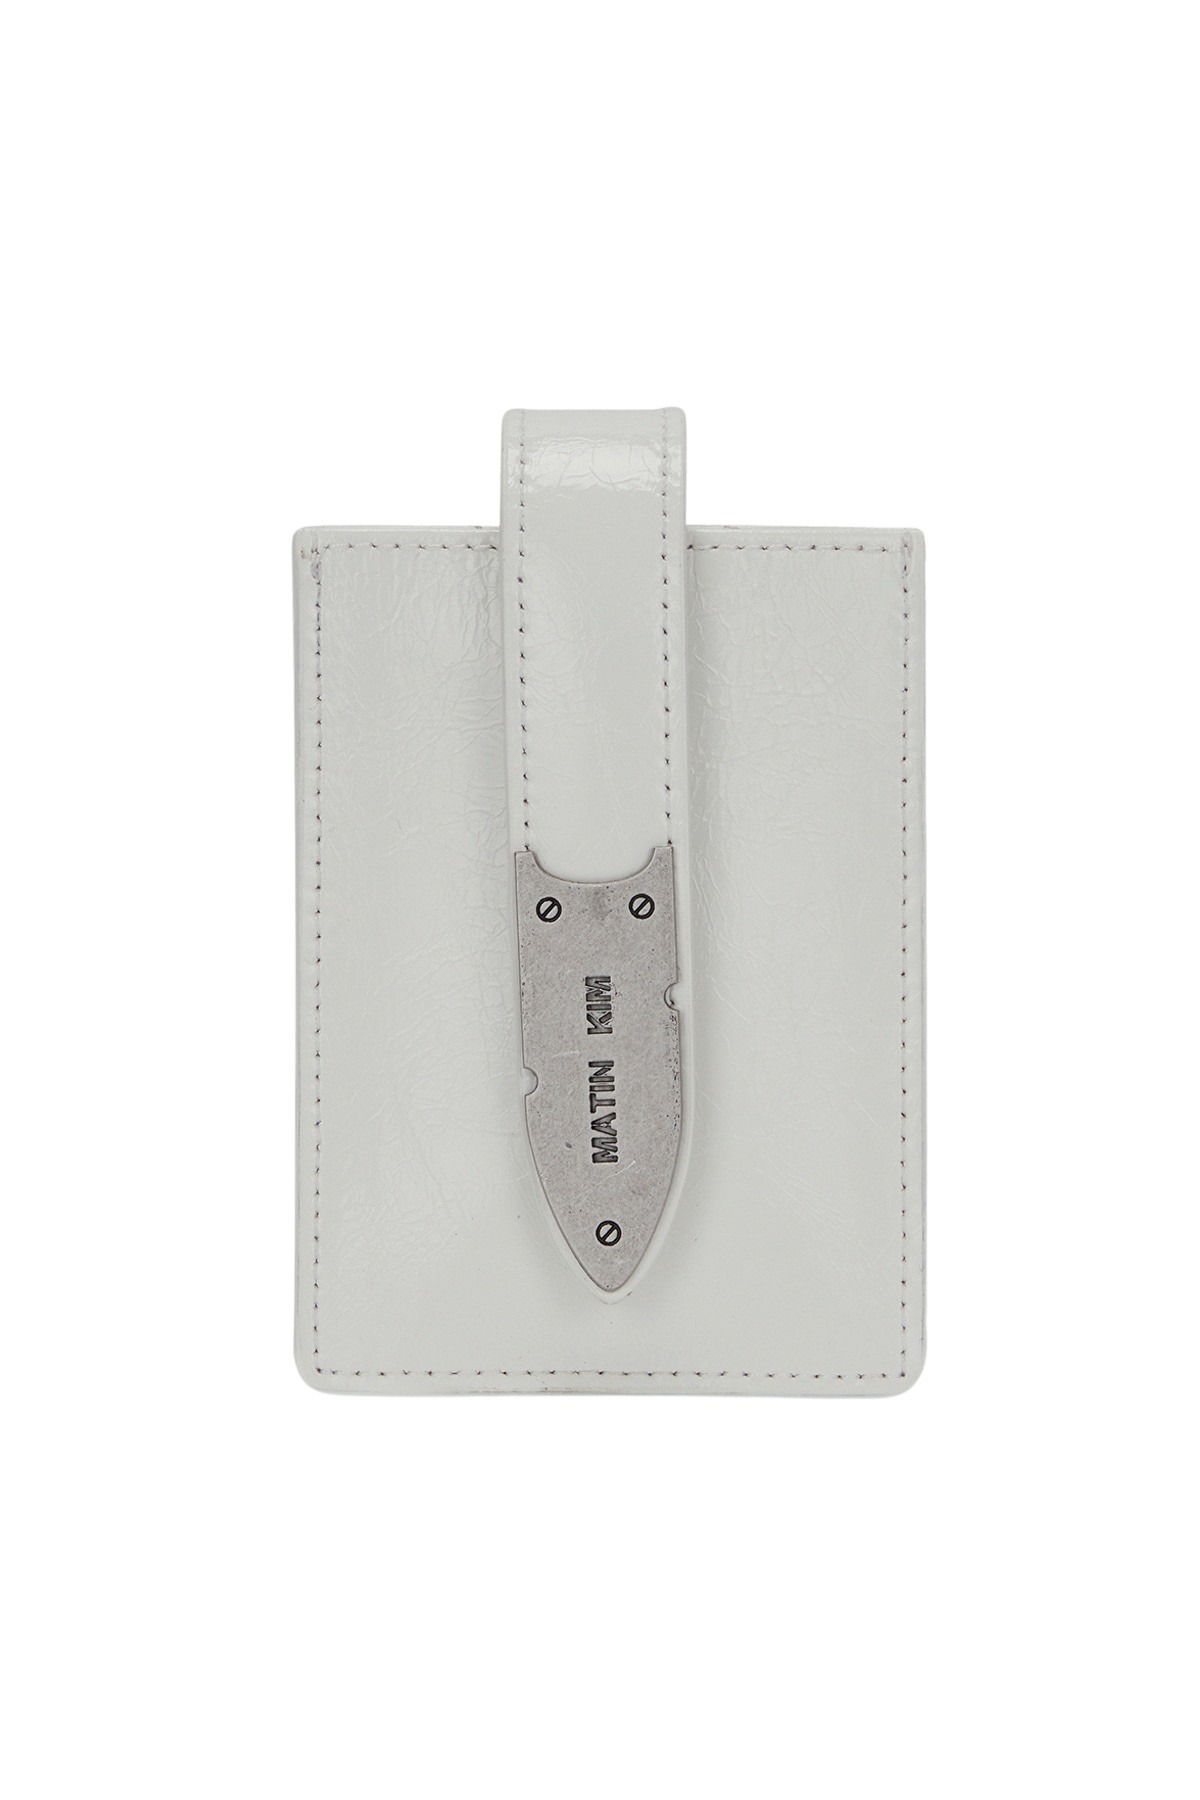 ACCORDION NECKLACE WALLET IN WHITE - MATINKIM